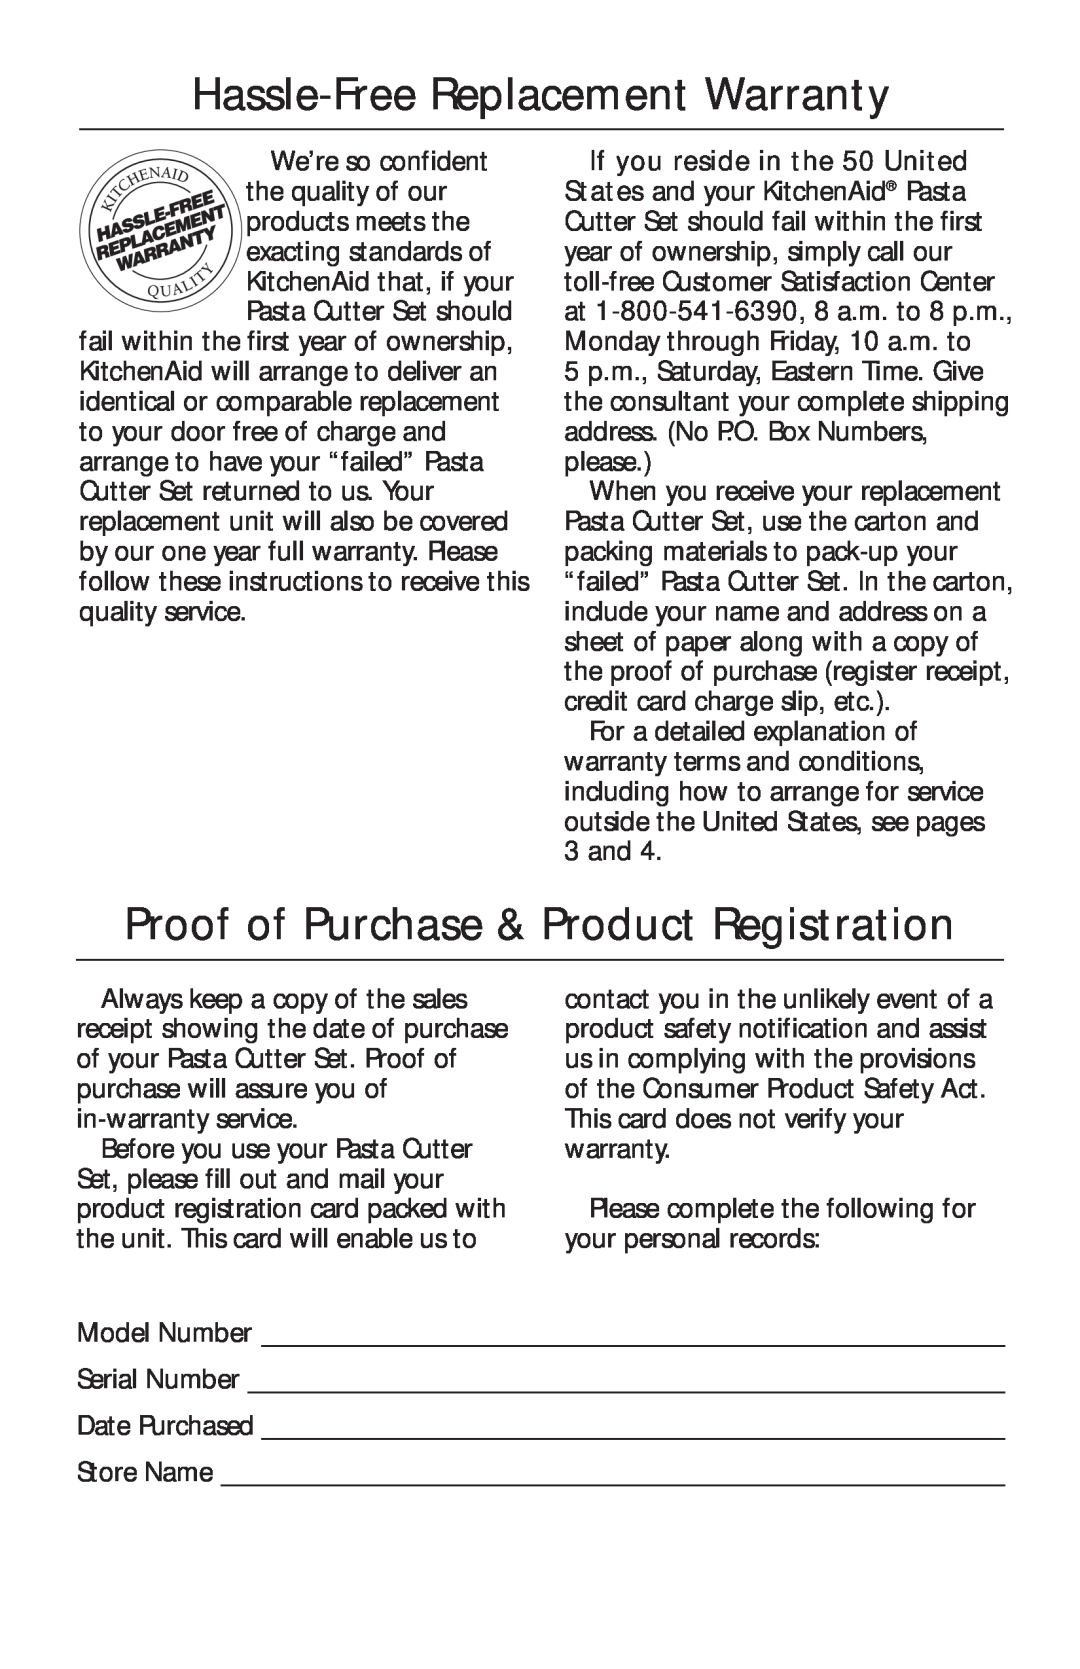 KitchenAid KPCA manual Hassle-Free Replacement Warranty, Proof of Purchase & Product Registration 